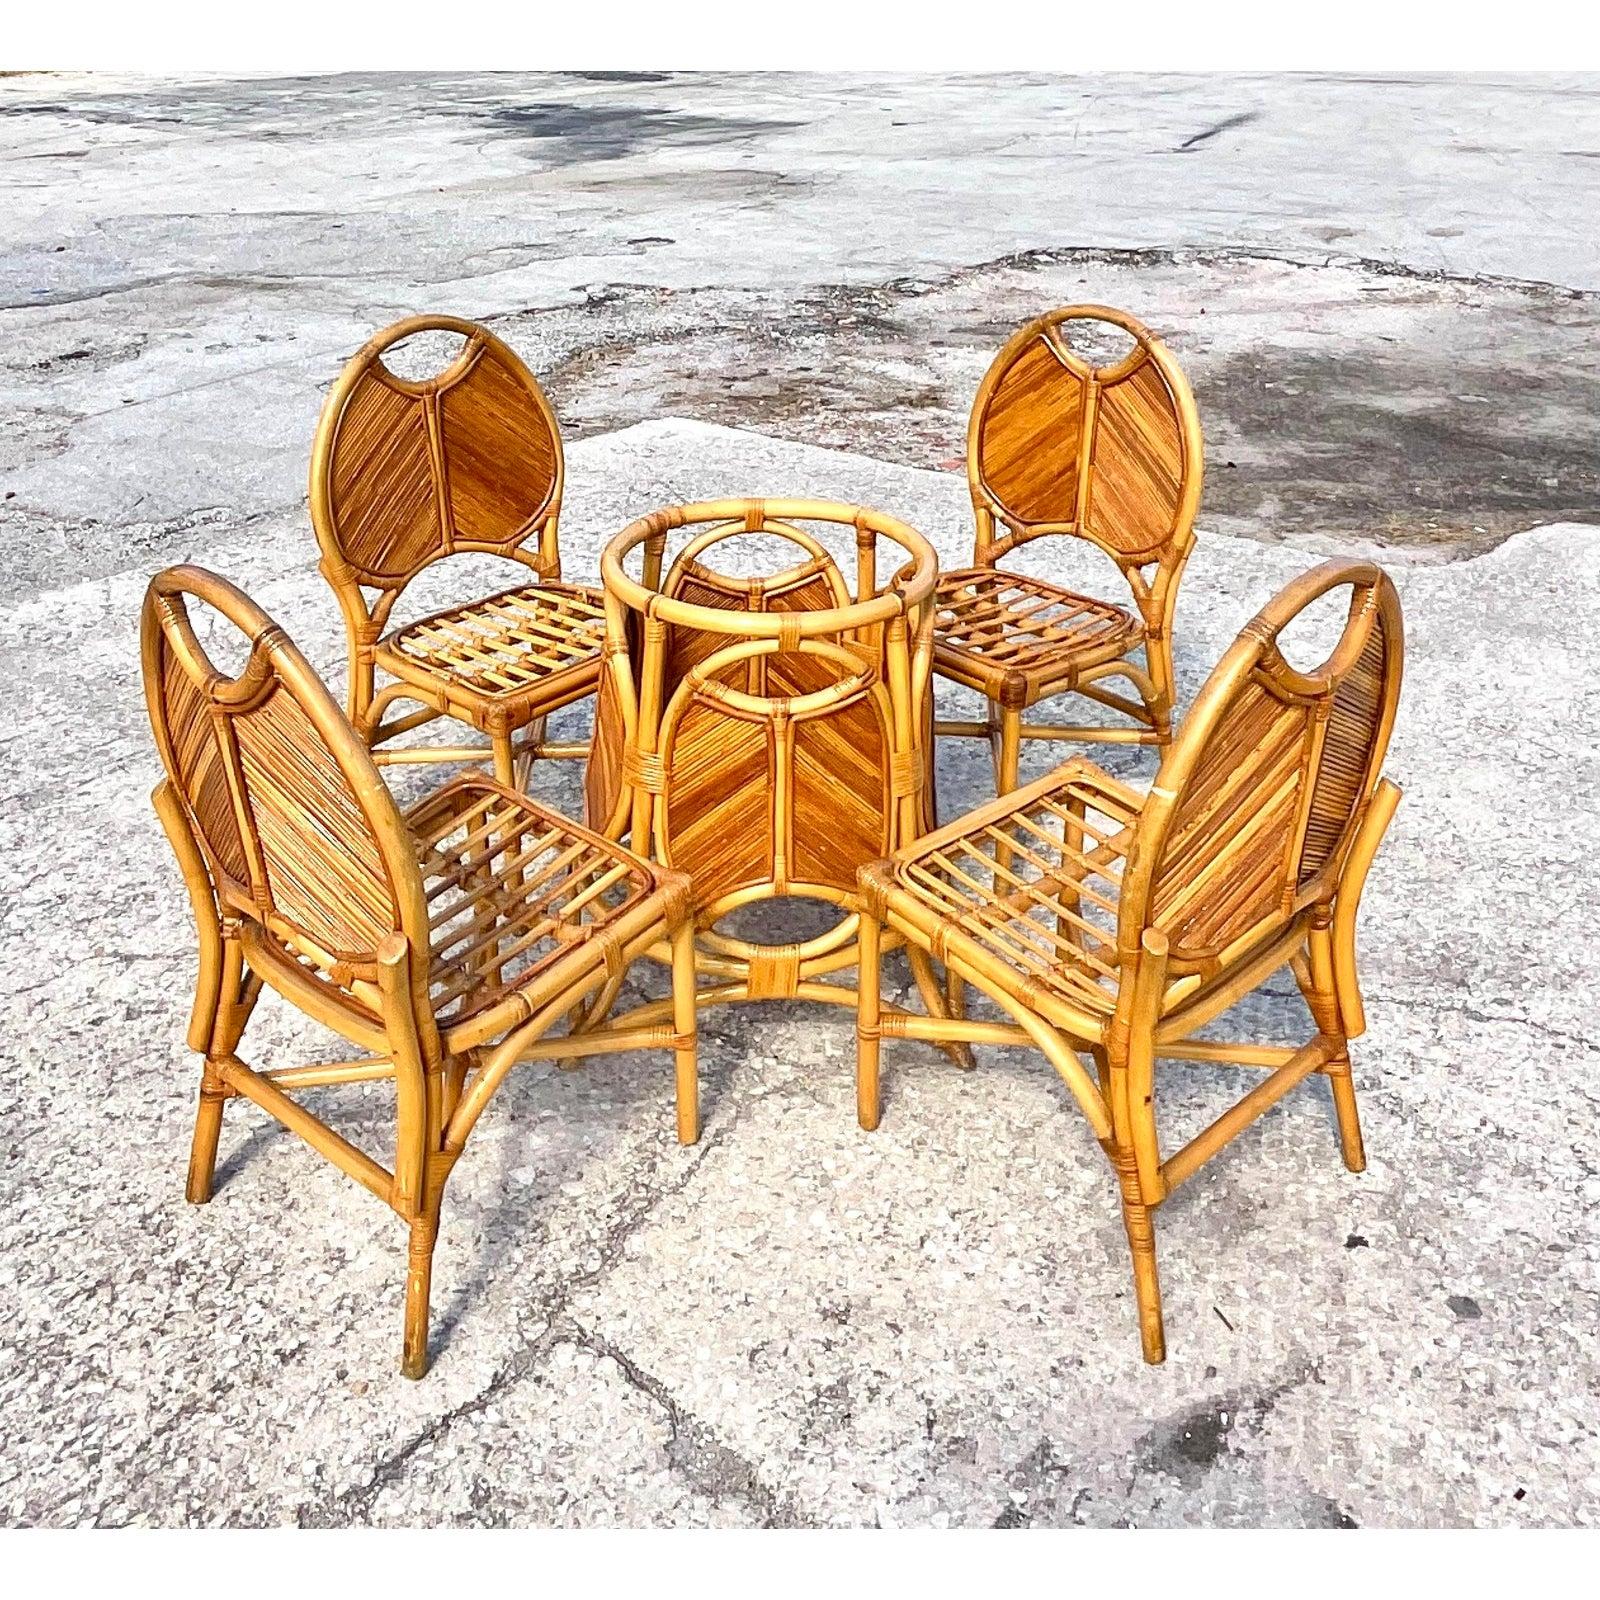 A spectacular set of vintage coastal dining chairs and pedestal. Beautiful natural pencil reed in a chic Chevron design. The same design is repeated in the pedestal for the table. The pedestal can handle glass up to 60 inches. Acquired from a Palm